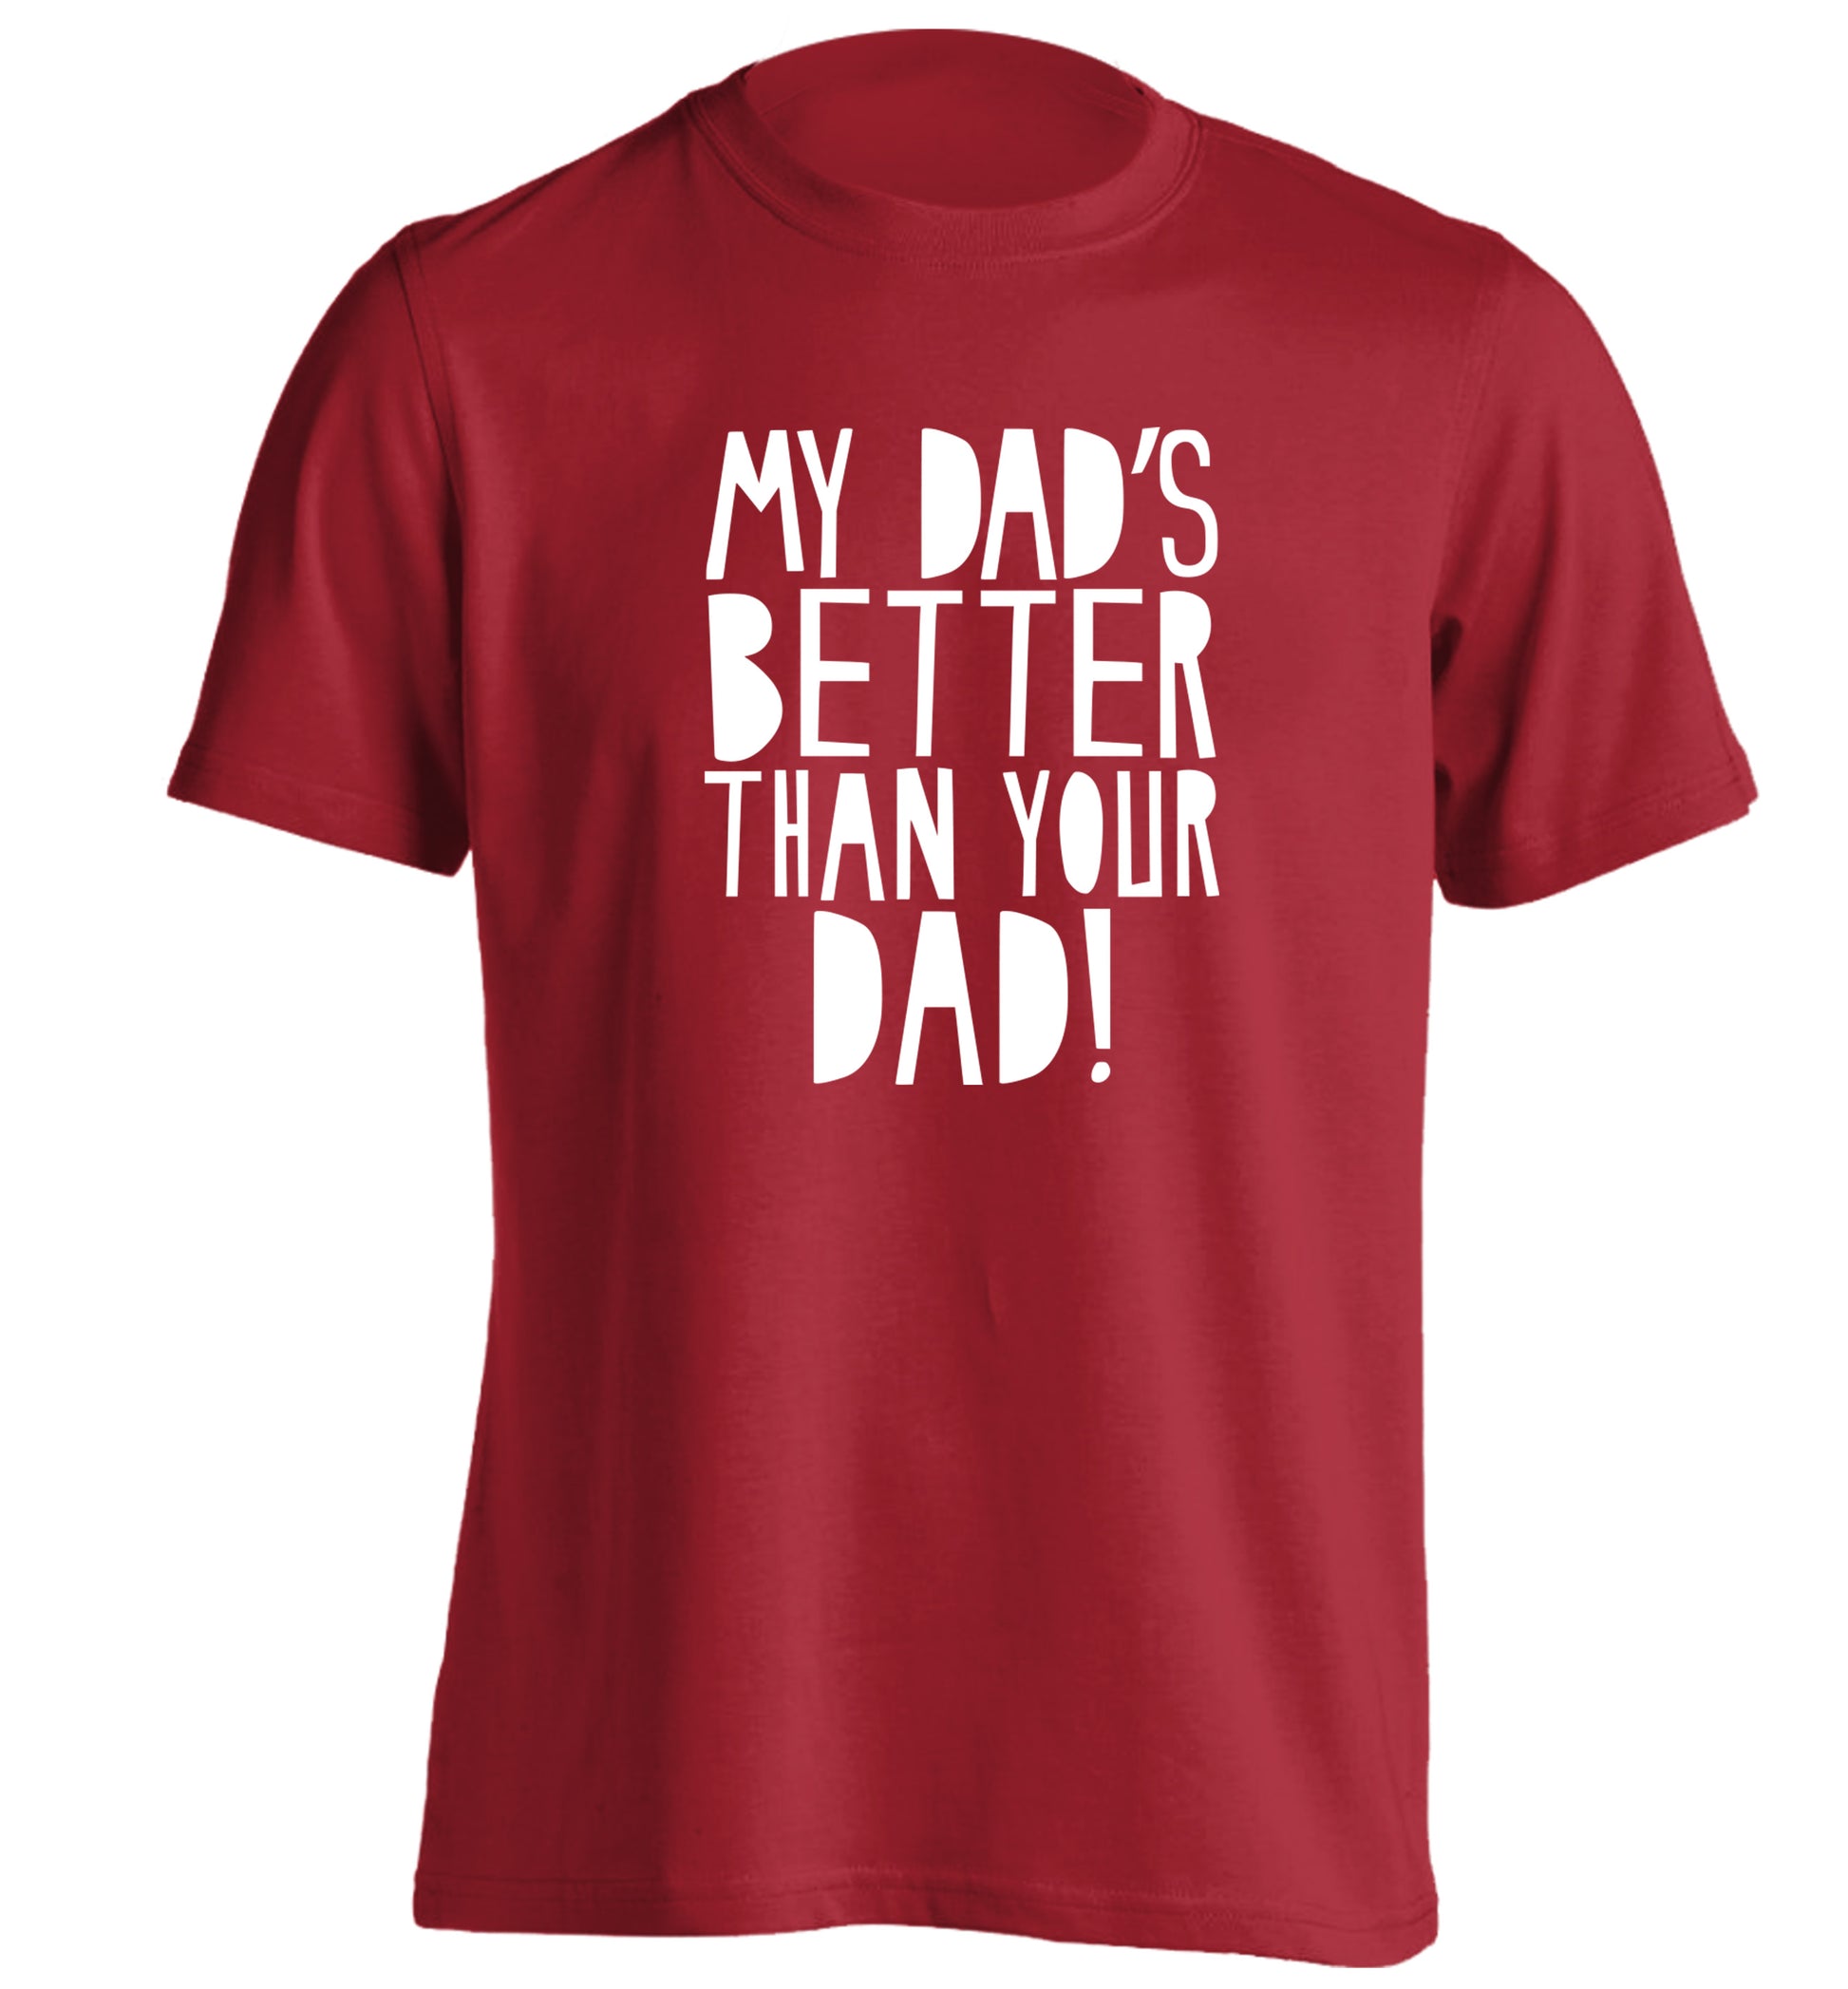 My dad's better than your dad adults unisex red Tshirt 2XL